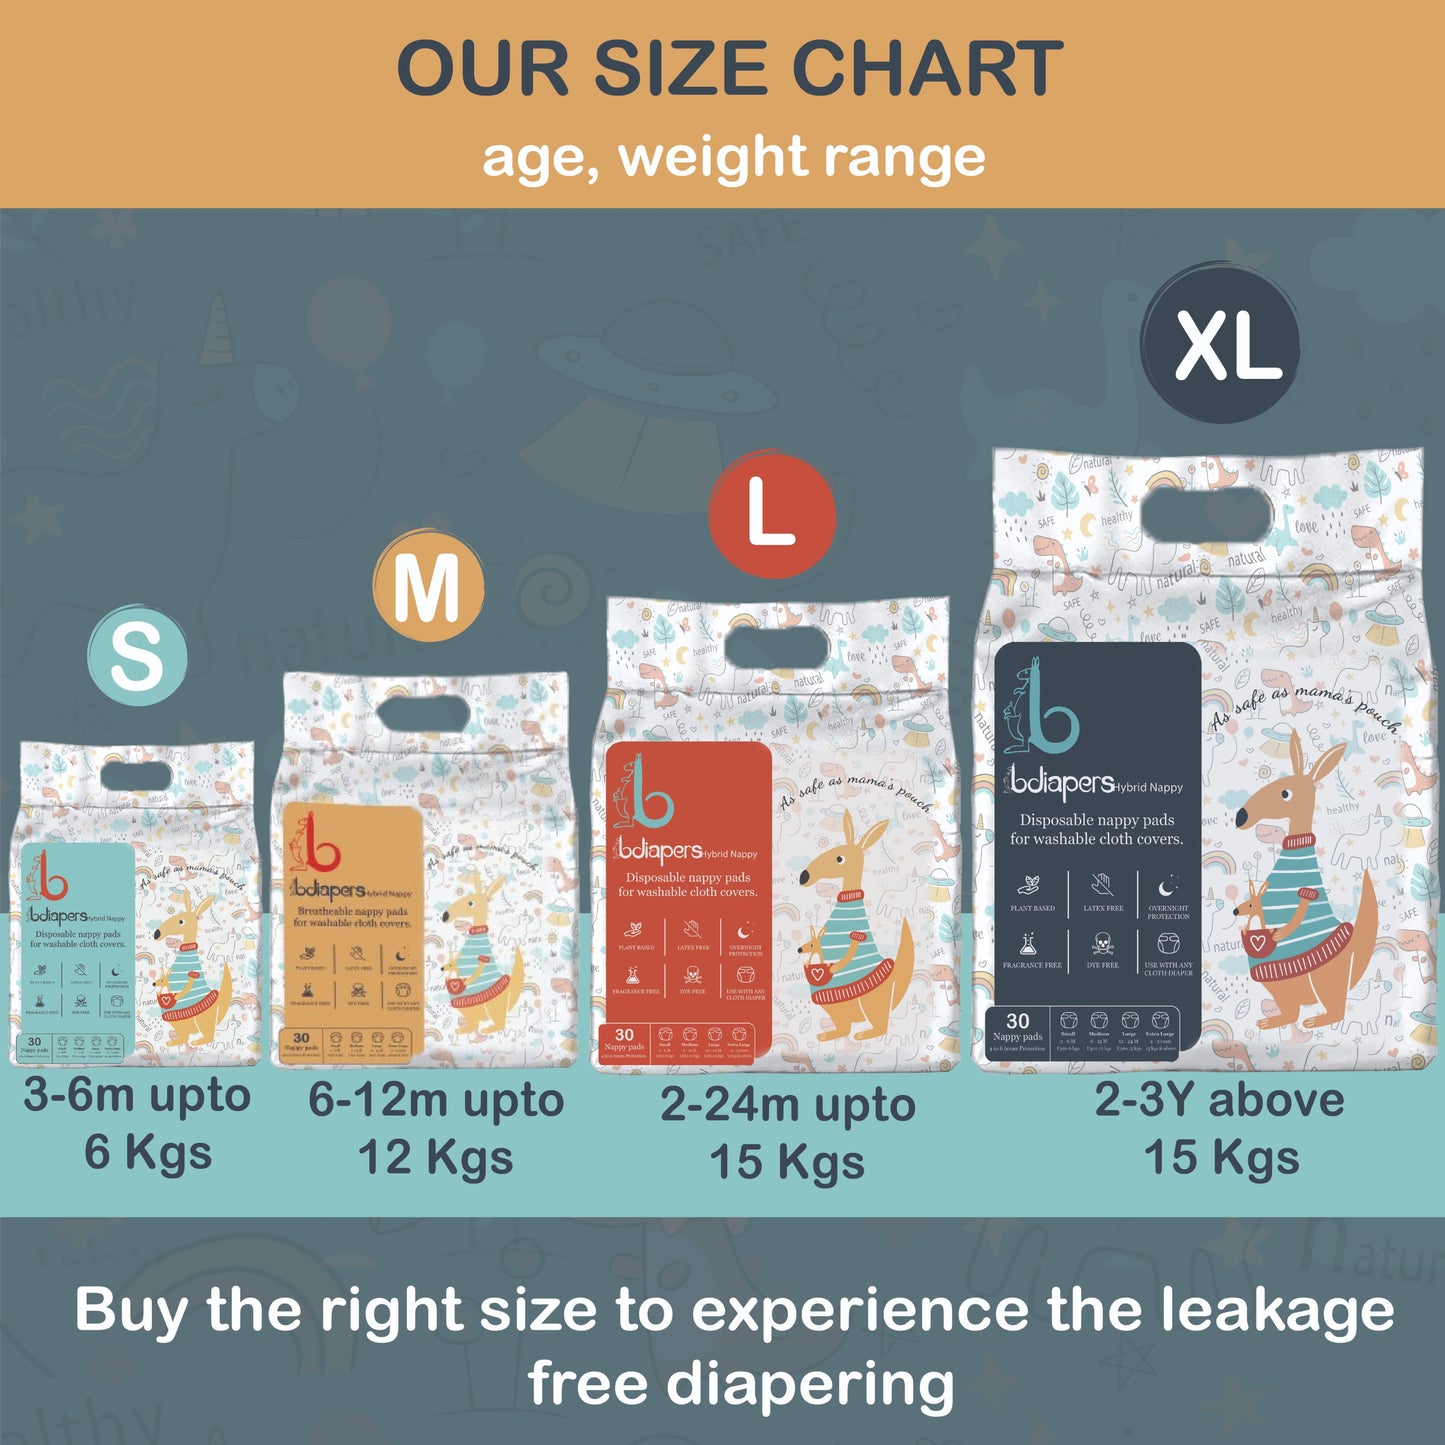 Our size chart with age and baby weight. Bdiapers have 4 sizes, each size package has its own color. Light blue for small for babies around 3-6 months weighing 3-6 kgs. Light brown for medium for babies around 6-12 months weighing 6-12 kgs. Dark reddish brown for large for babies around 12-24 months weighing 10-15 kgs. Dark blue for extra large for babies around 24-36 months weighing 14-17 kgs. 